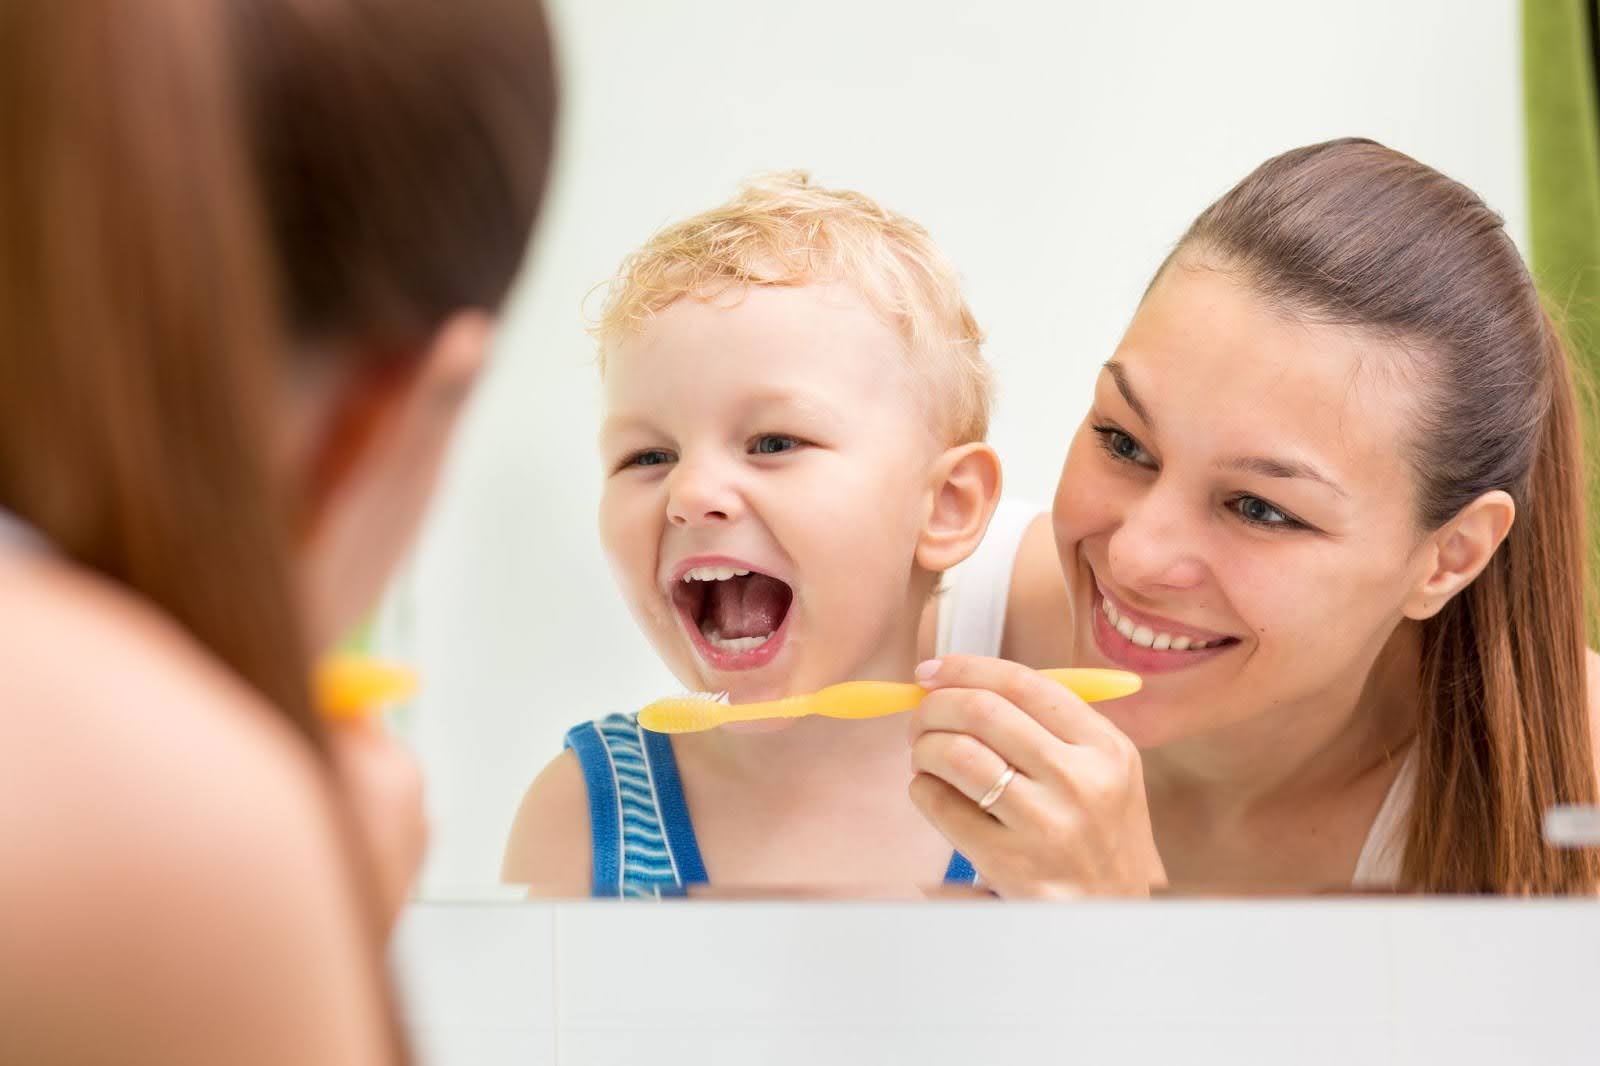 A parent brushing their child’s teeth to prevent a child's dental emergency